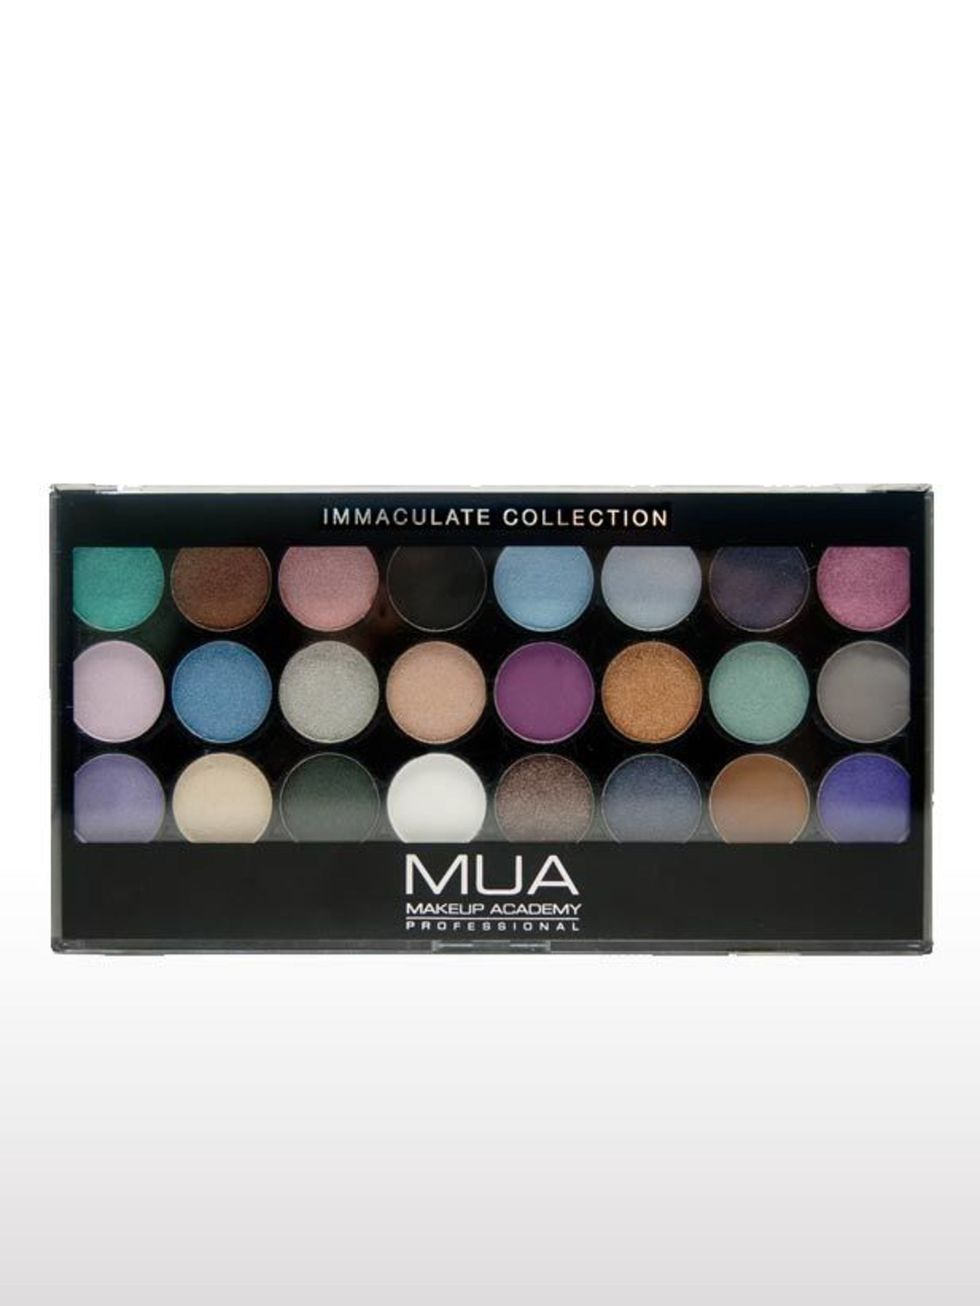 <p>MUA Pro Immaculate Collection, £8, at <a href="http://www.superdrug.com/">Superdrug</a></p>